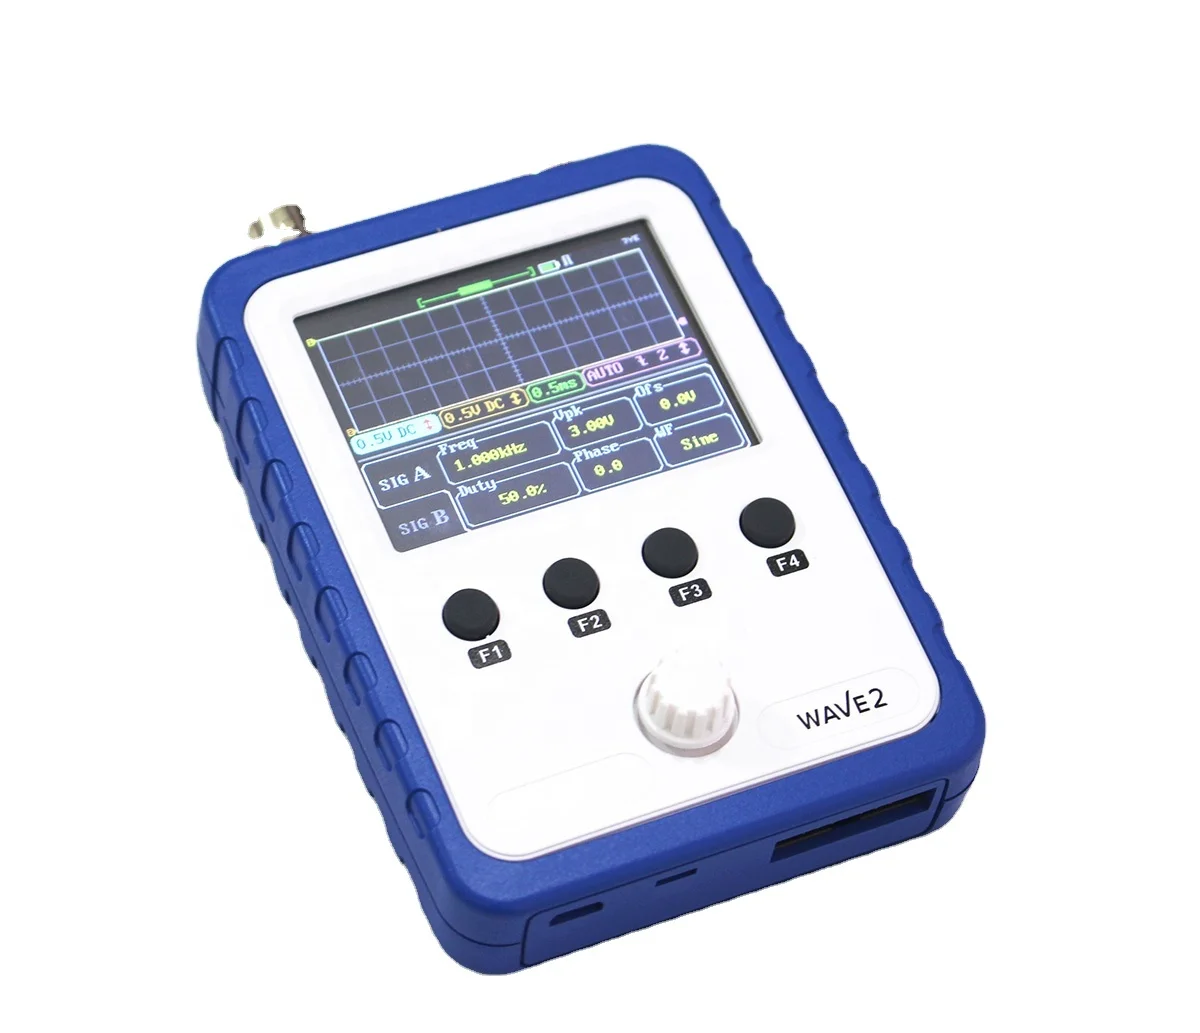 

Brand new WAVE2 Portable Oscilloscope kit for wholesales